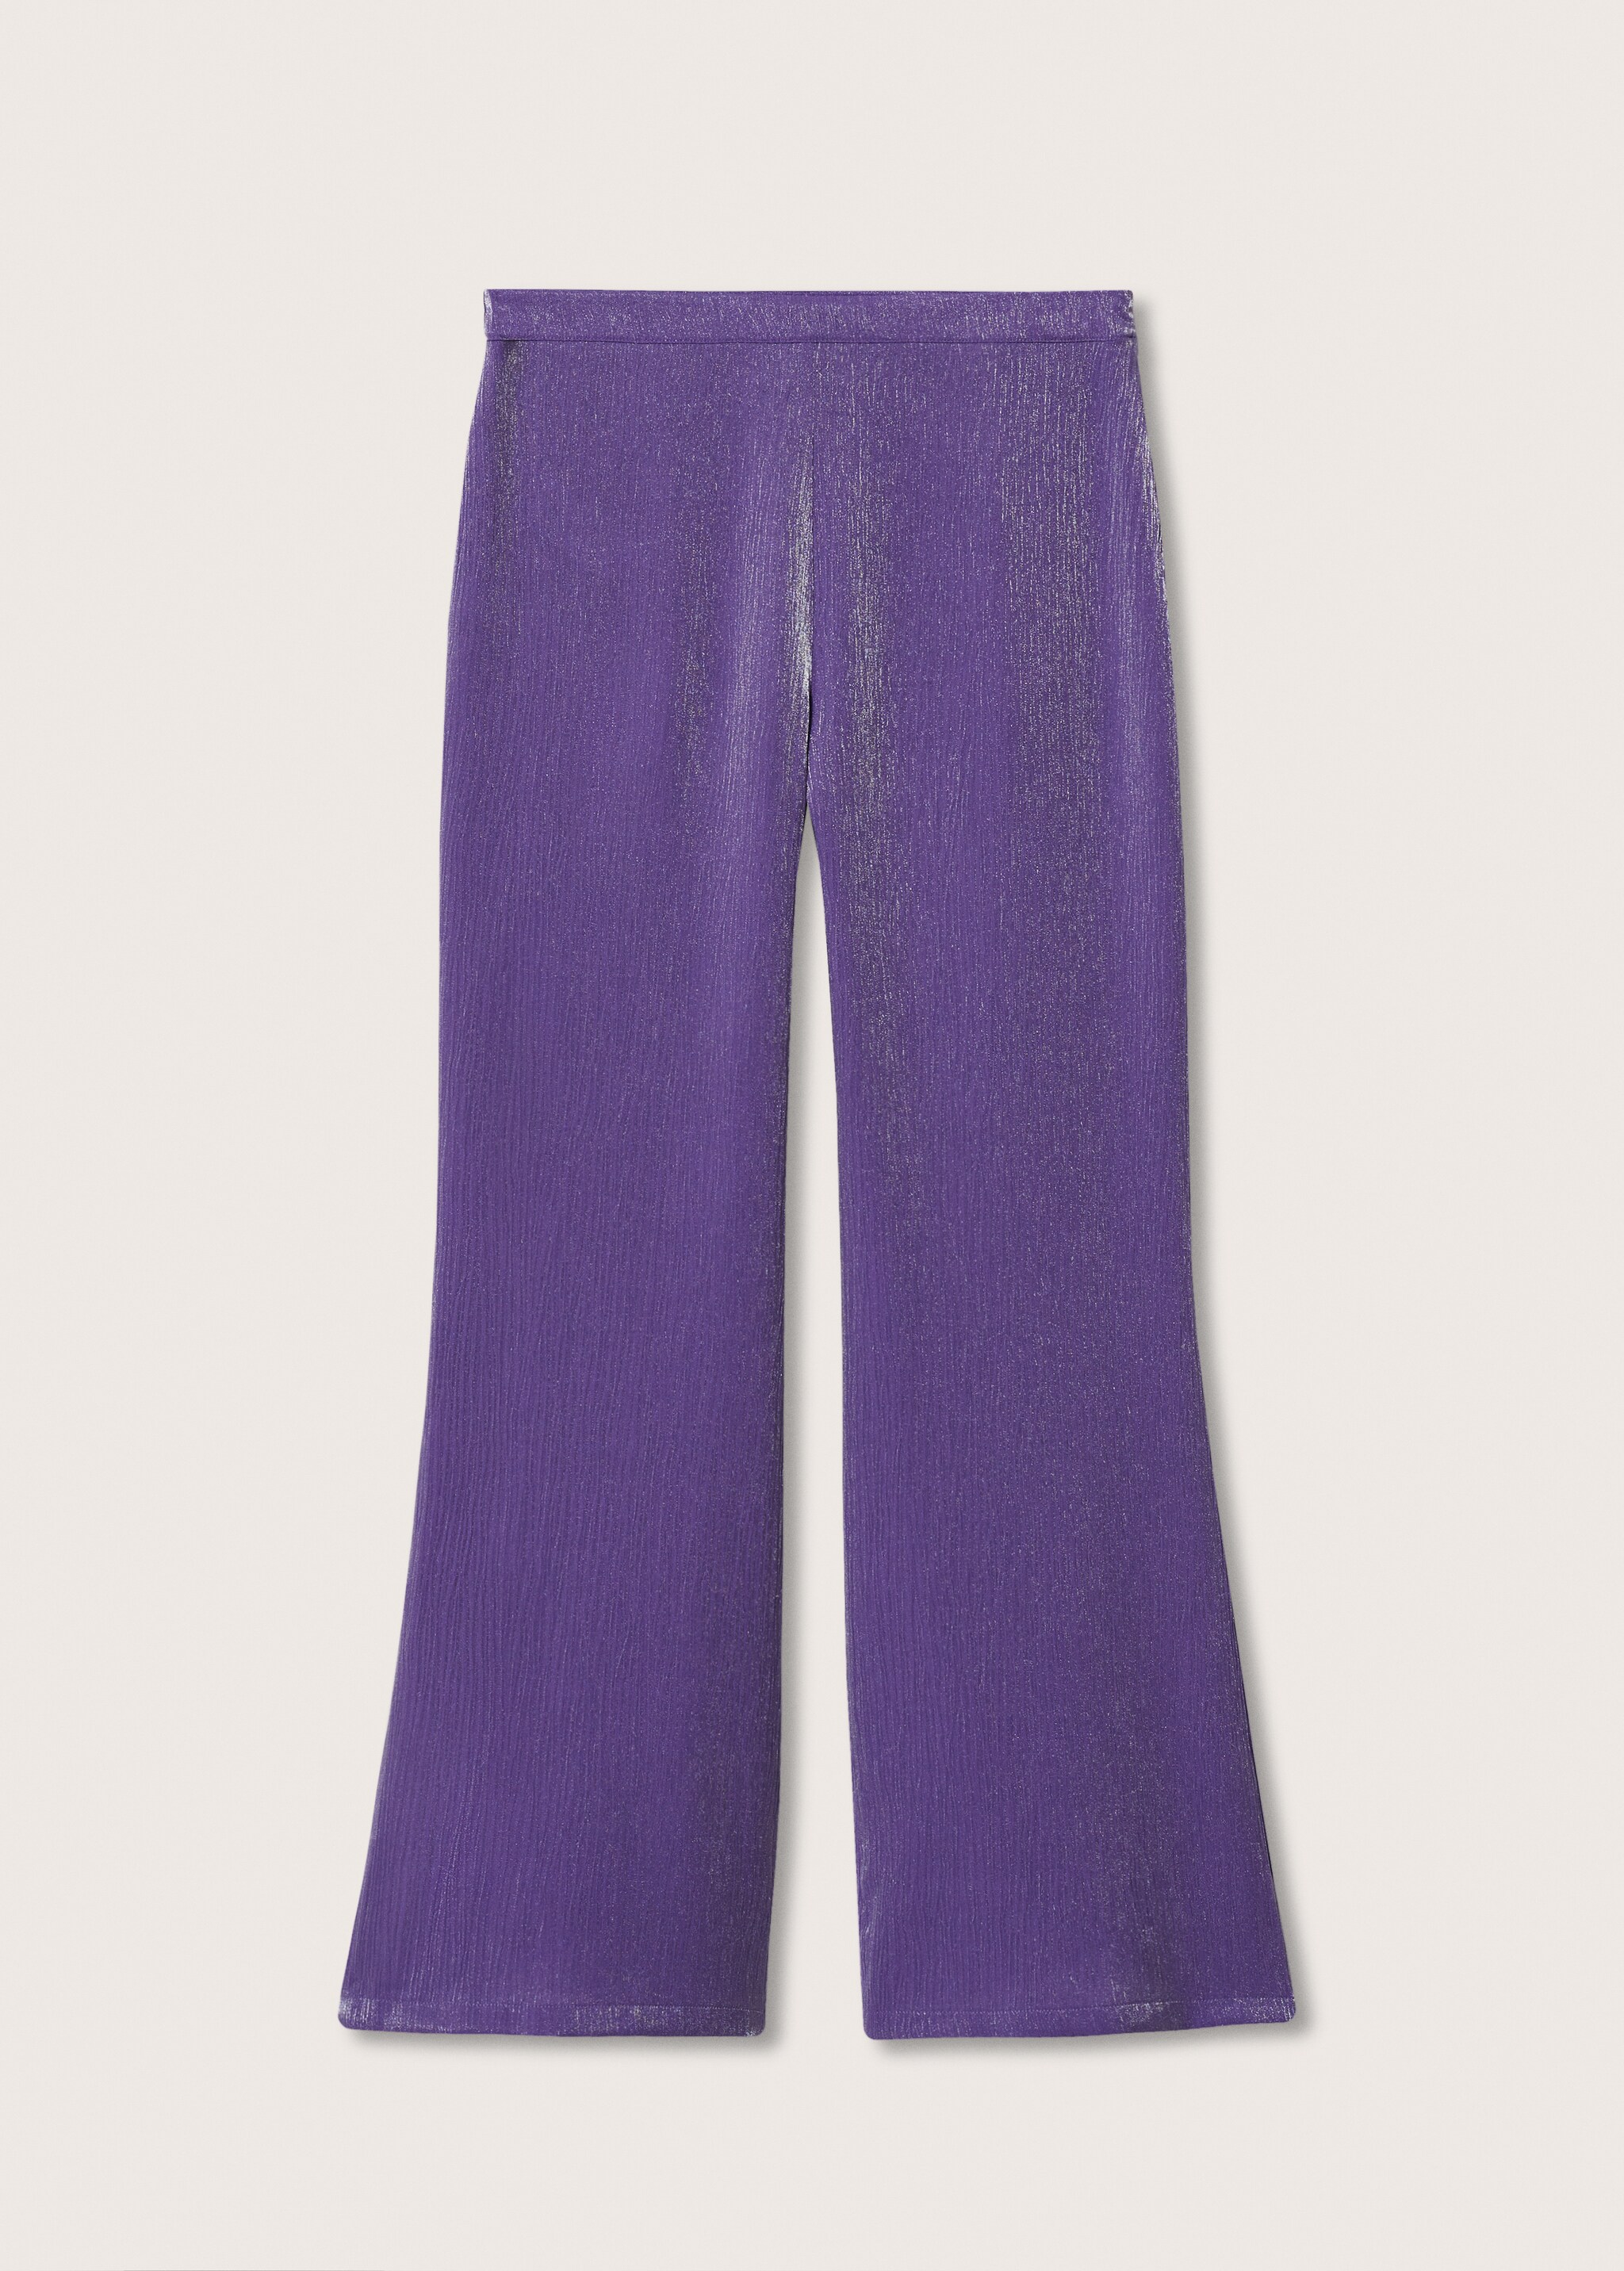 Satin palazzo trousers - Article without model